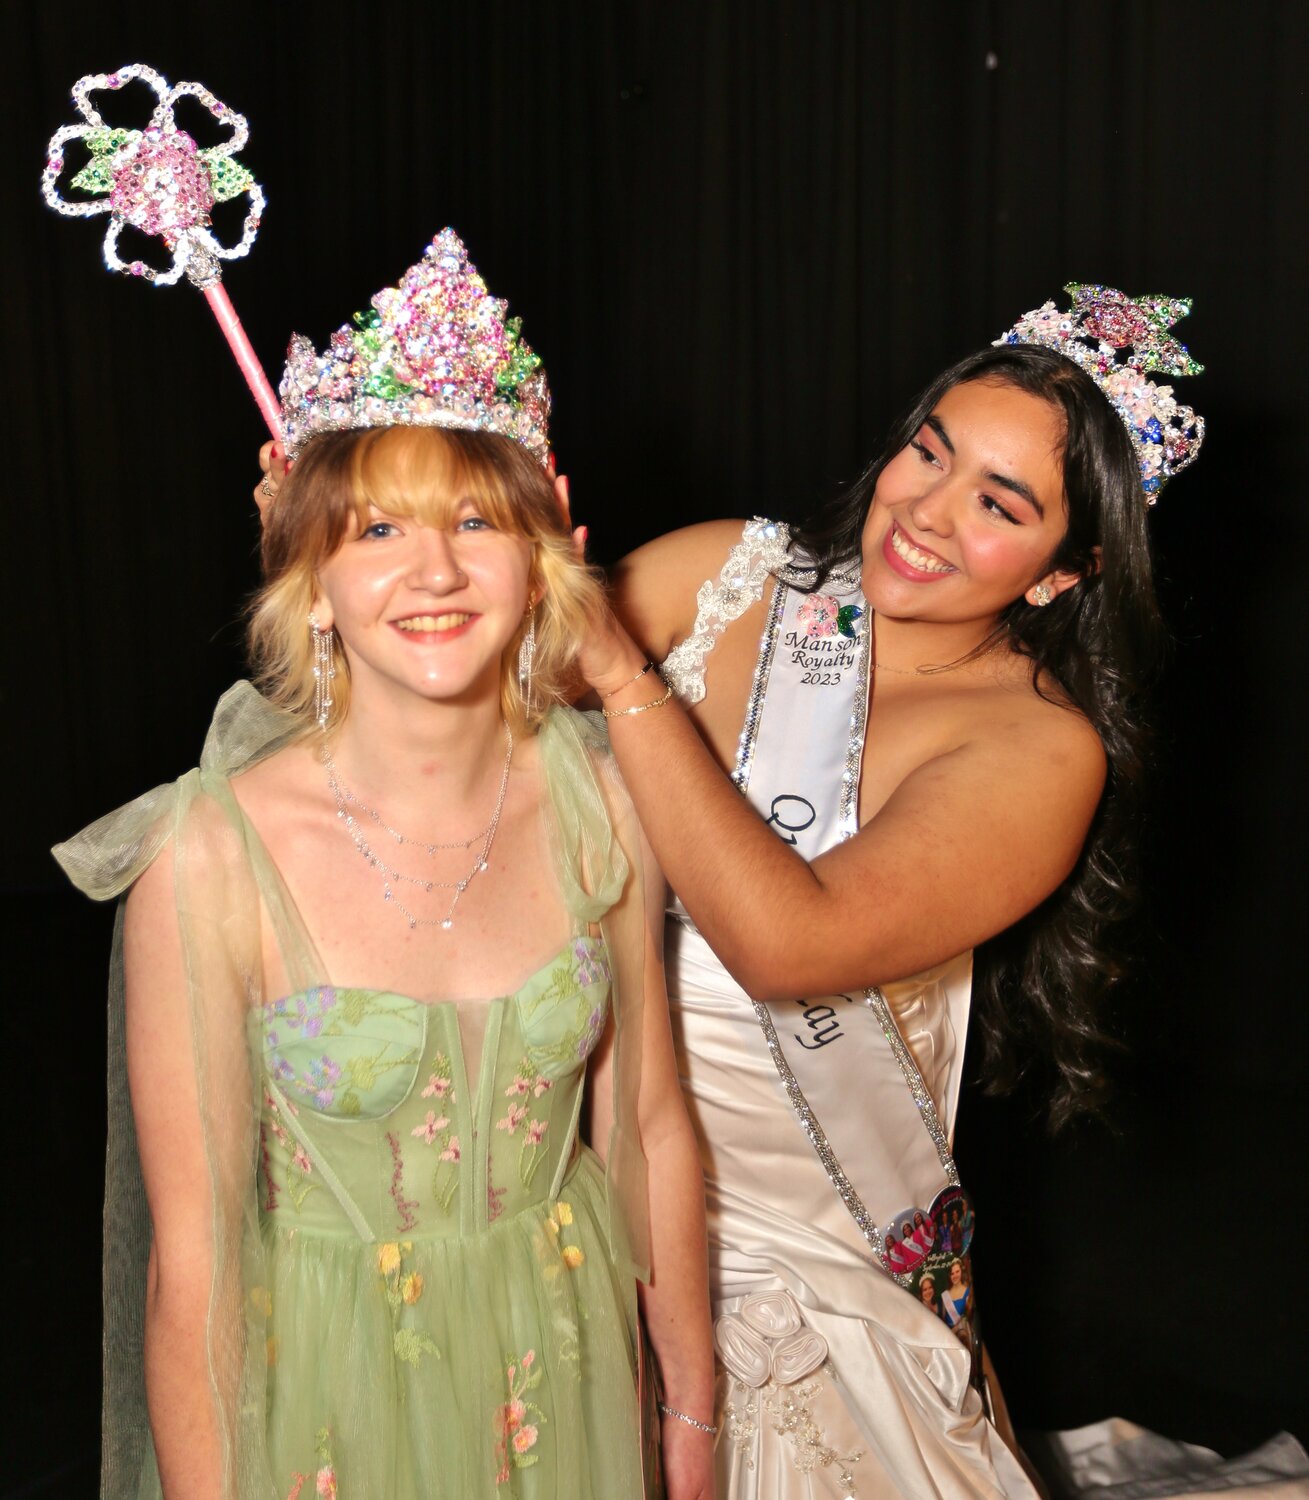 2023 Manson Apple Blossom Queen May Juarez crowns Isabelle Harris as queen of the 2024 Manson Apple Blossom Festival.